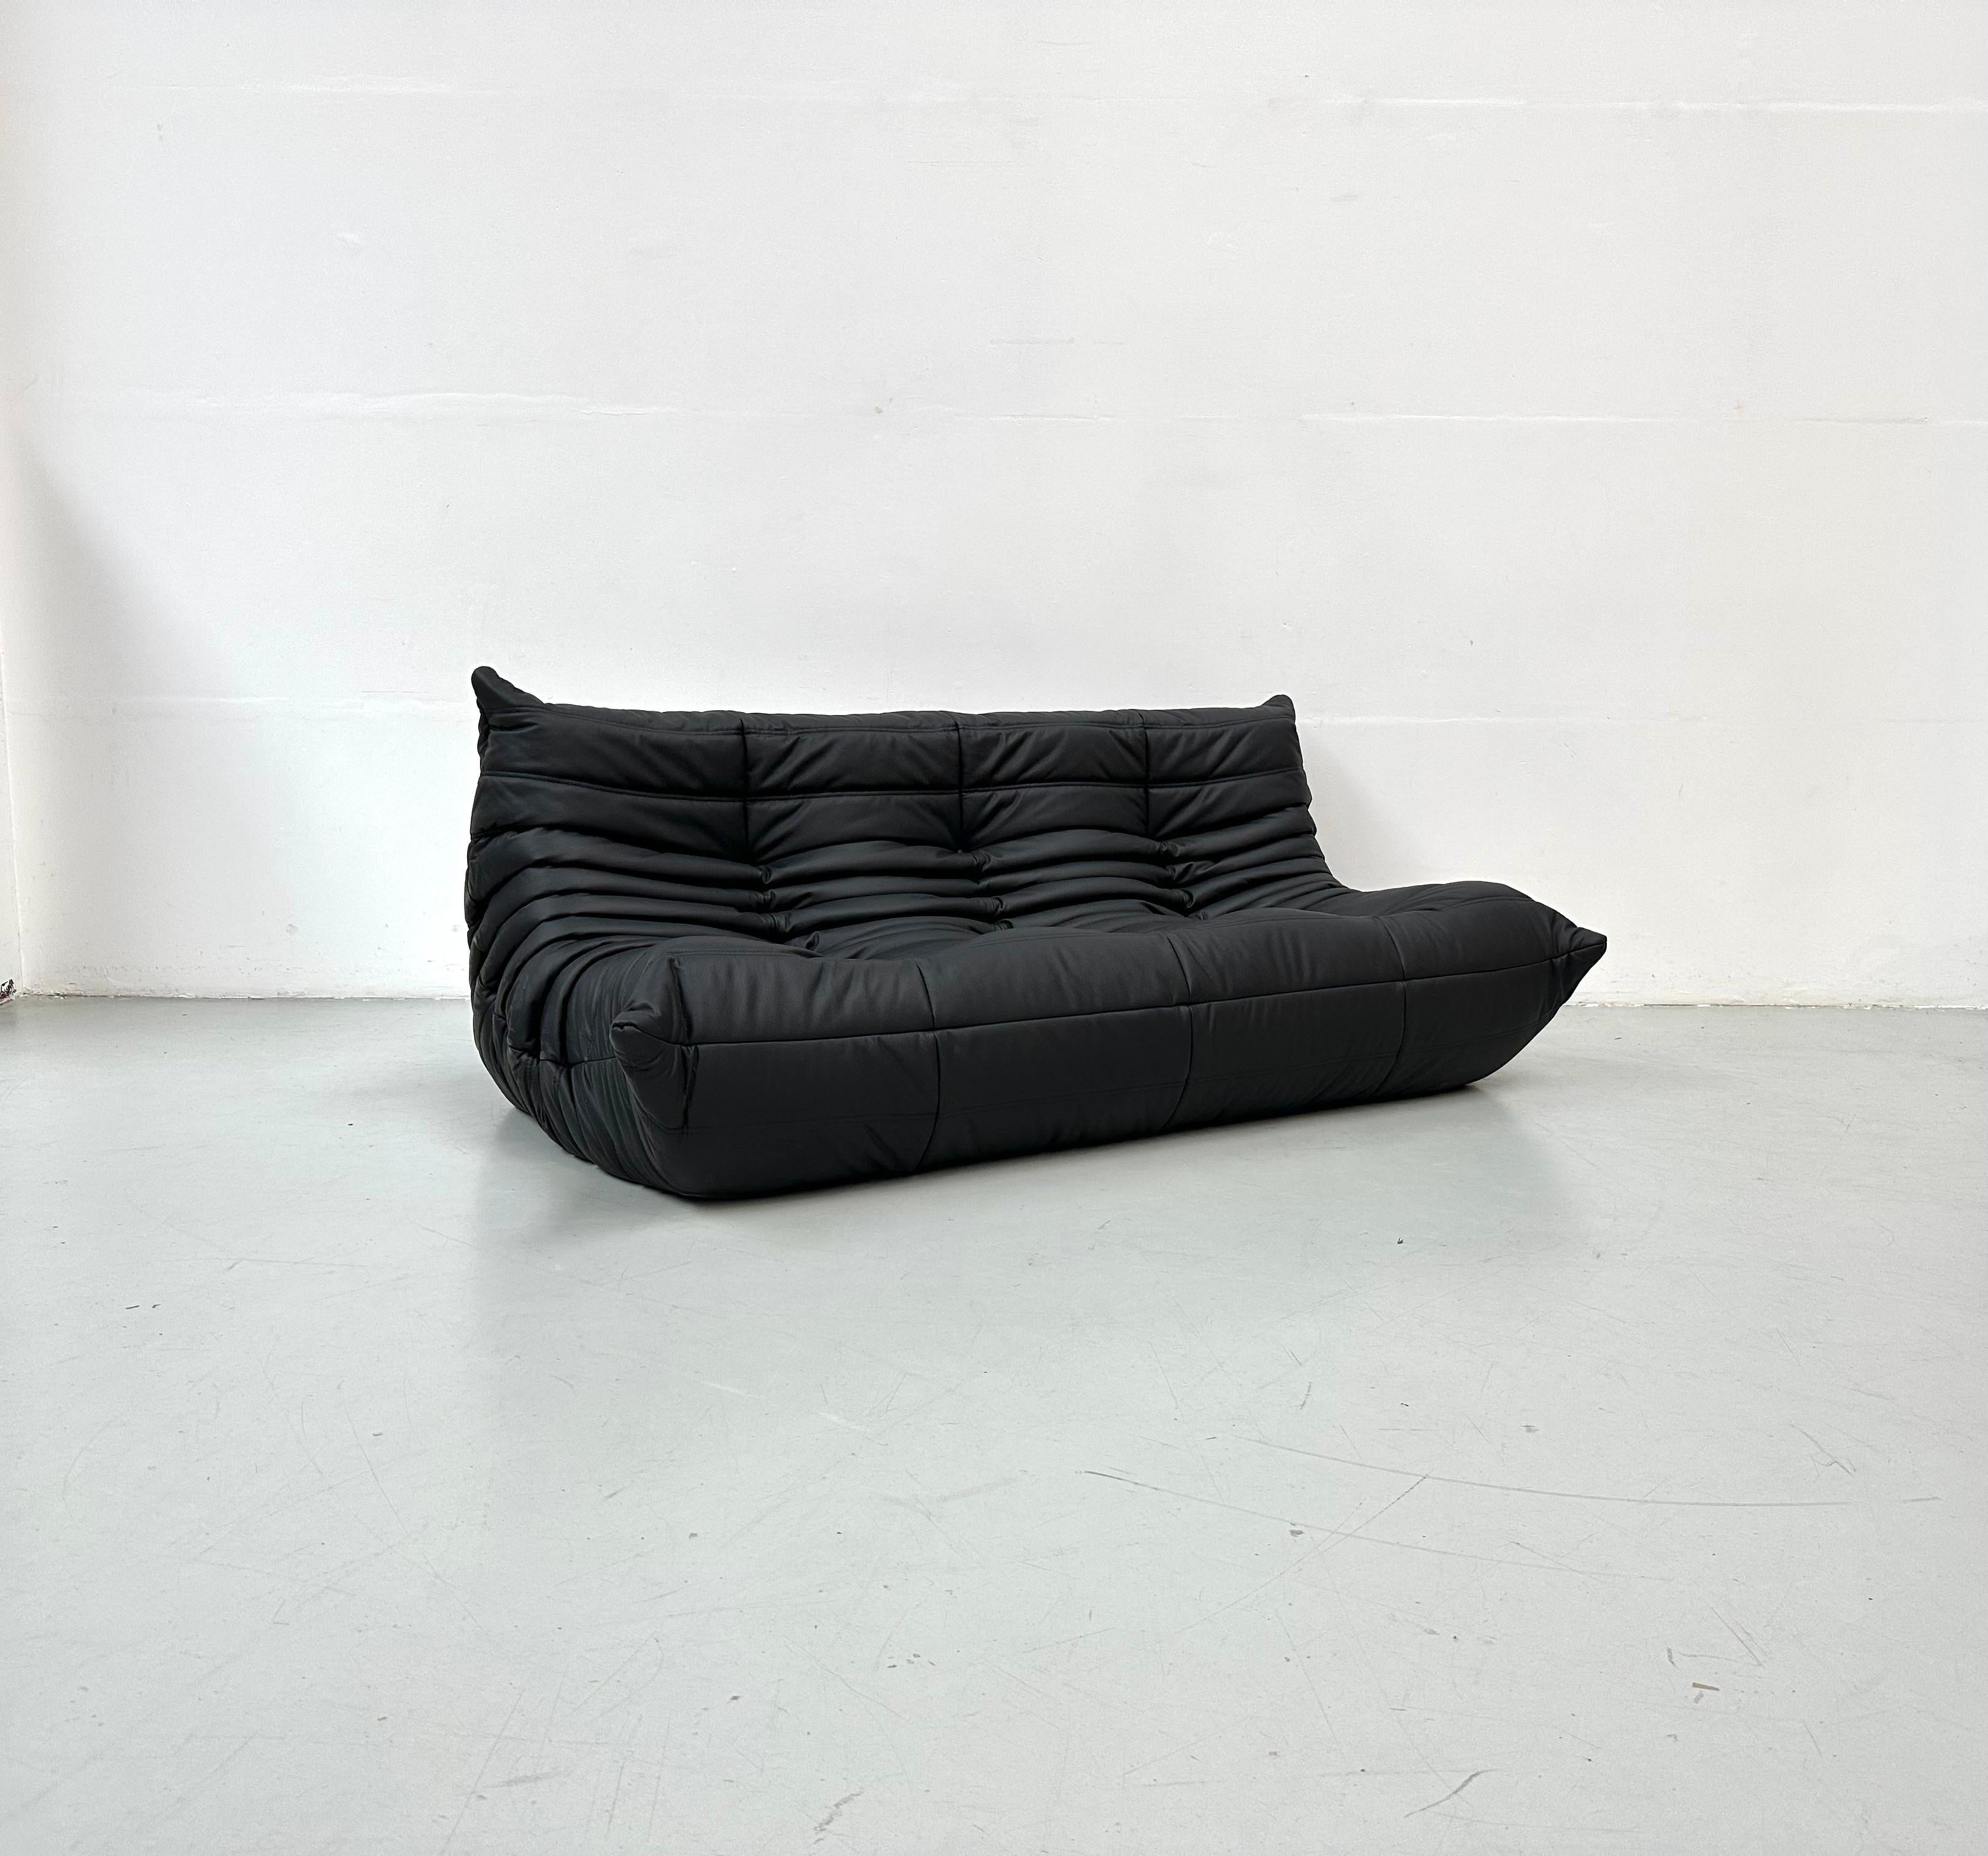 Mid-Century Modern French Vintage Togo Sofa in Black Leather by Michel Ducaroy for Ligne Roset. For Sale